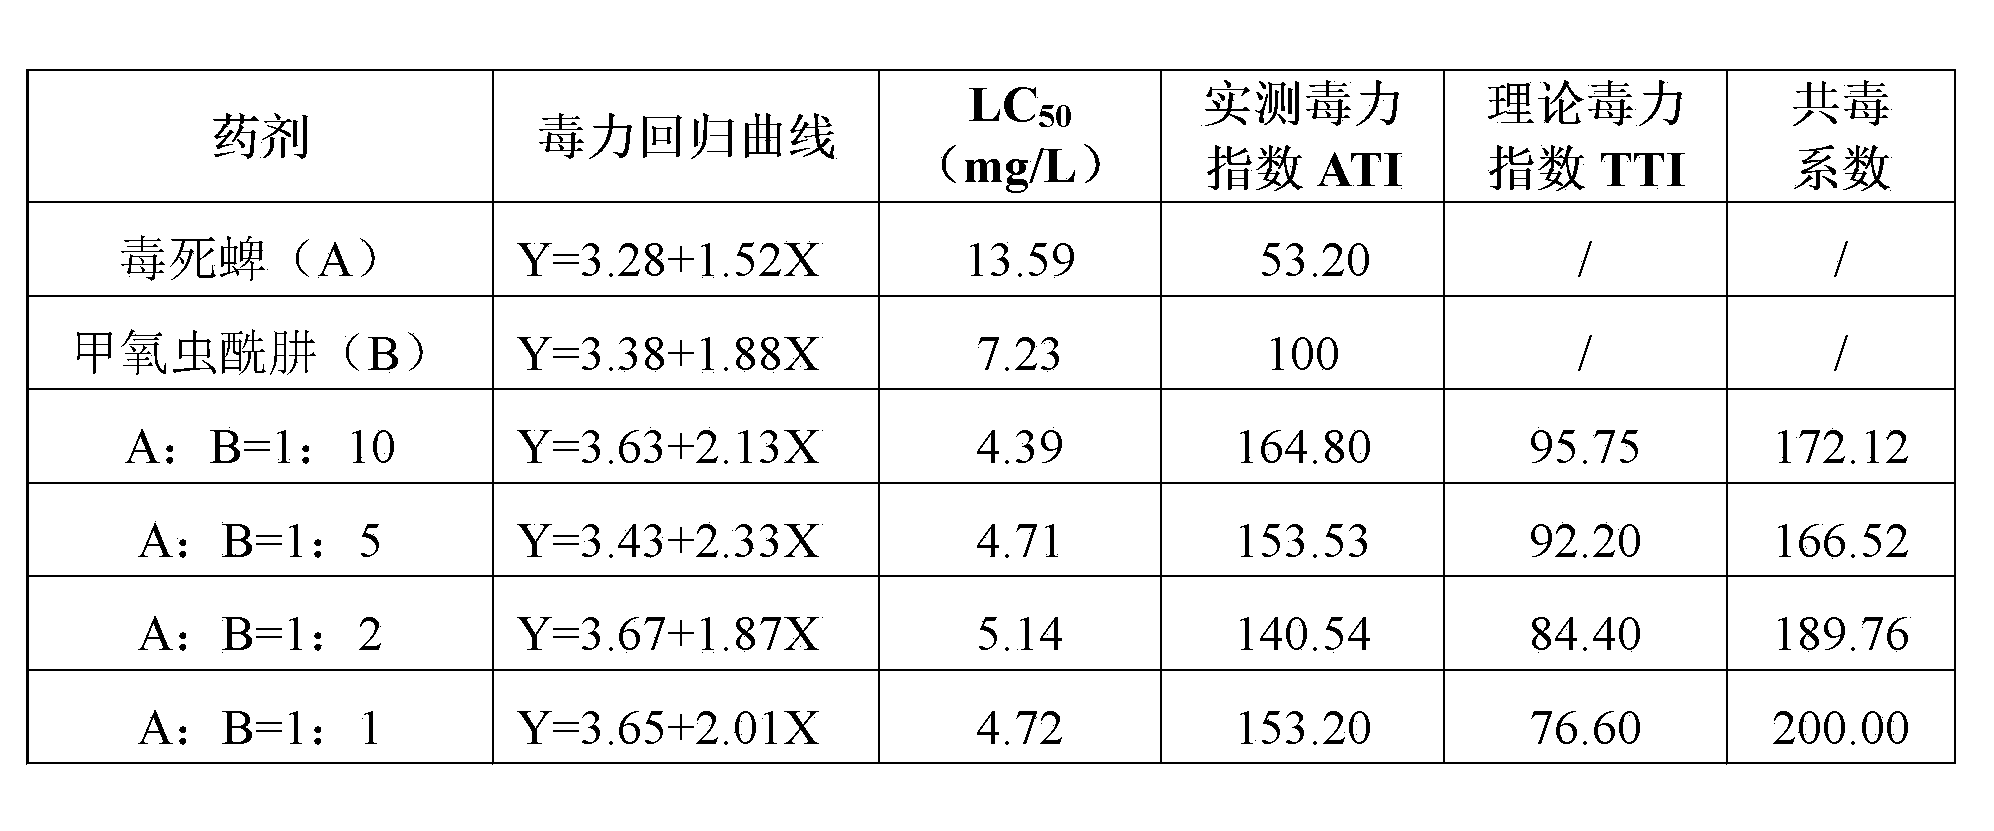 Compound pesticidal composition containing chlorpyrifos and methoxyfenozide and application thereof